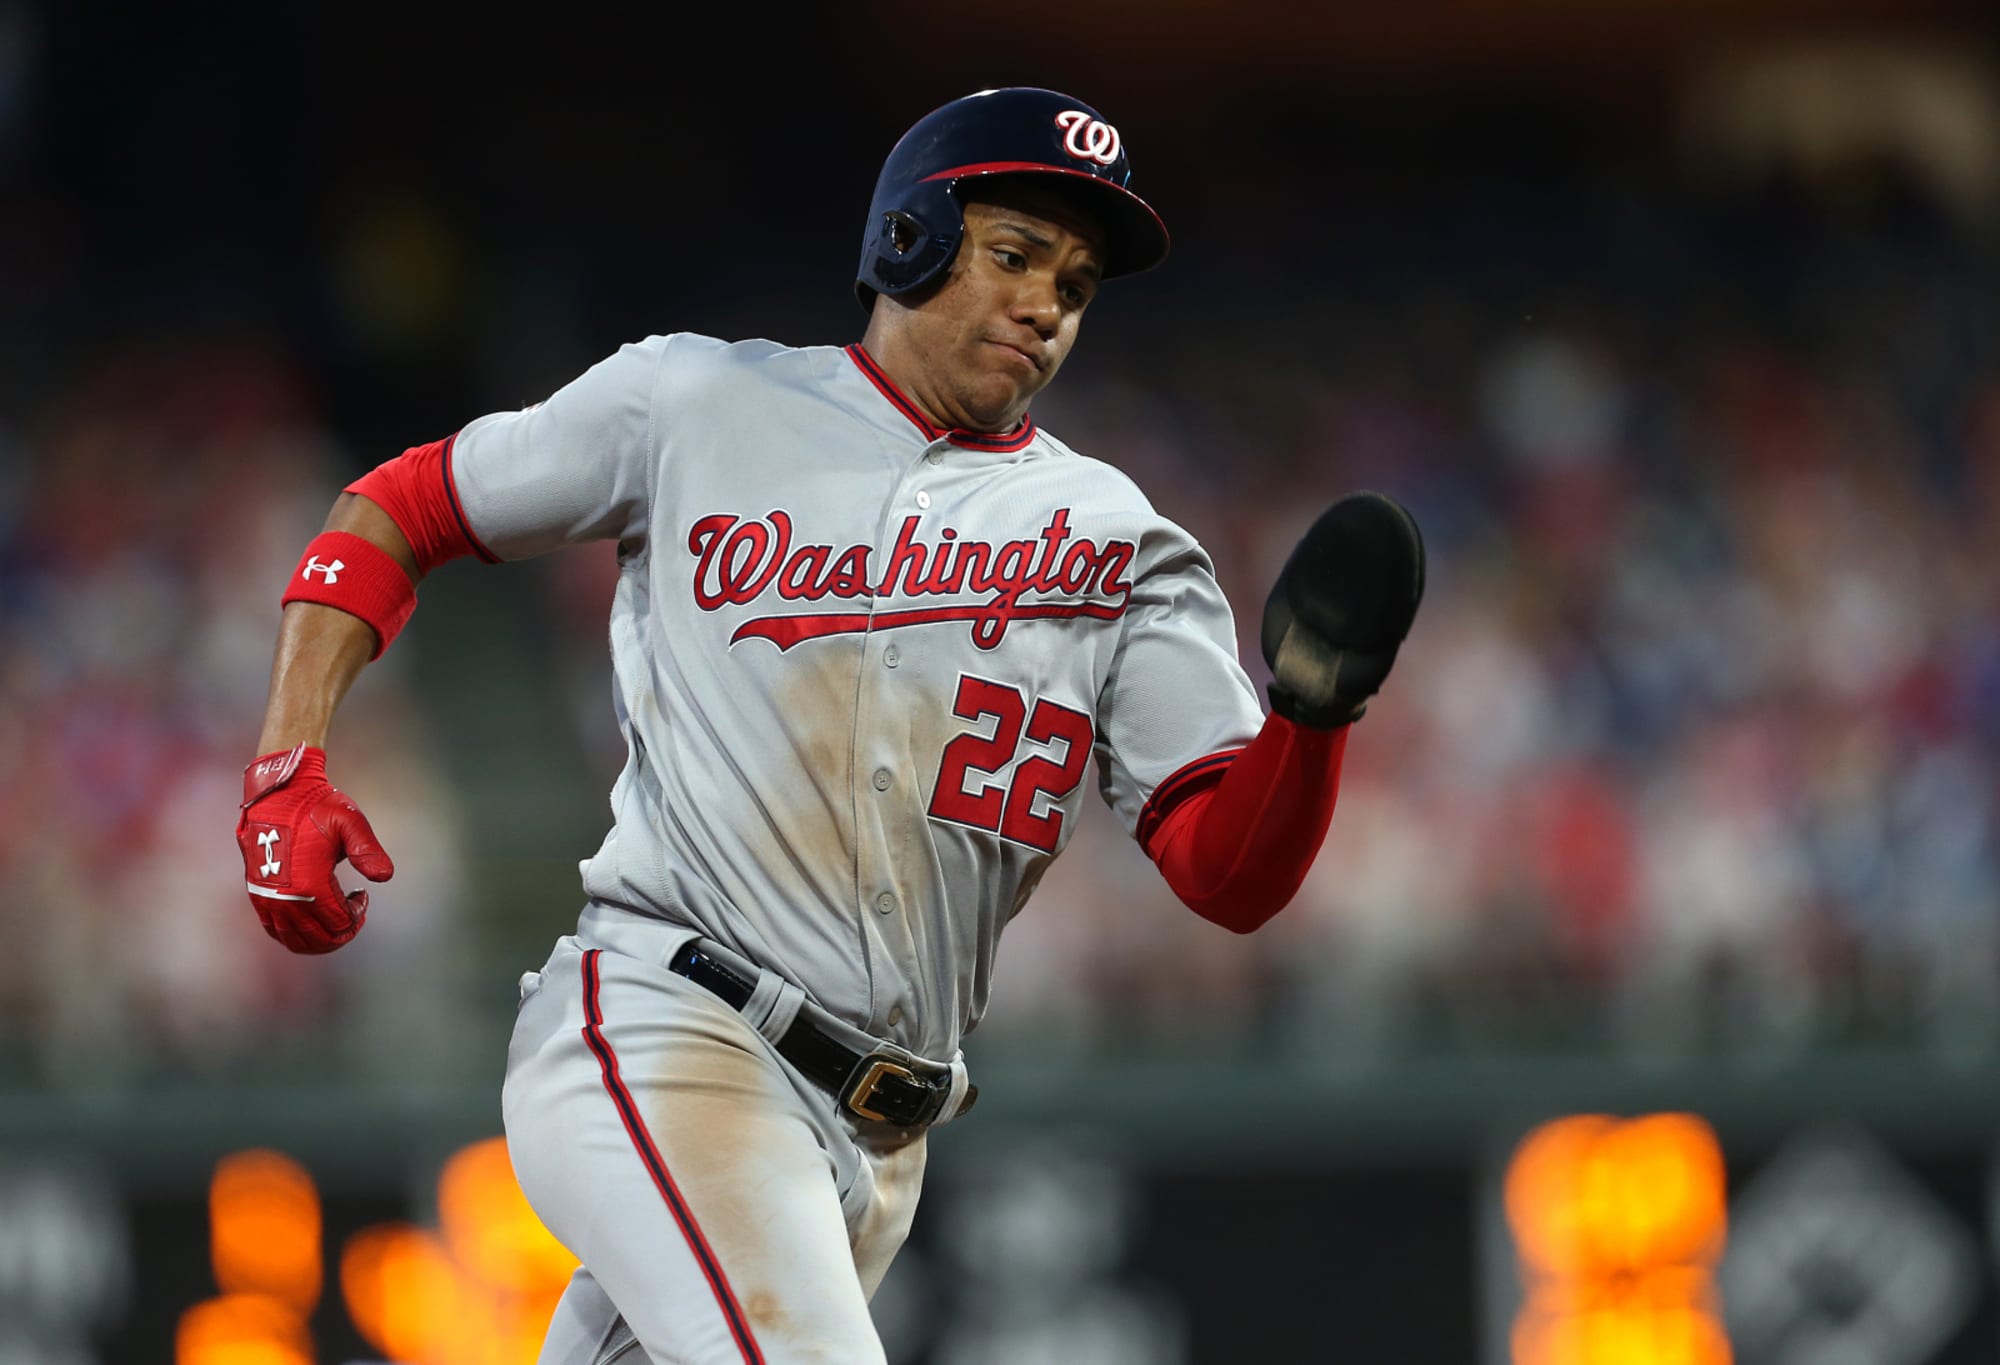 Washington Nationals' outfield mix for 2019 with or without Bryce